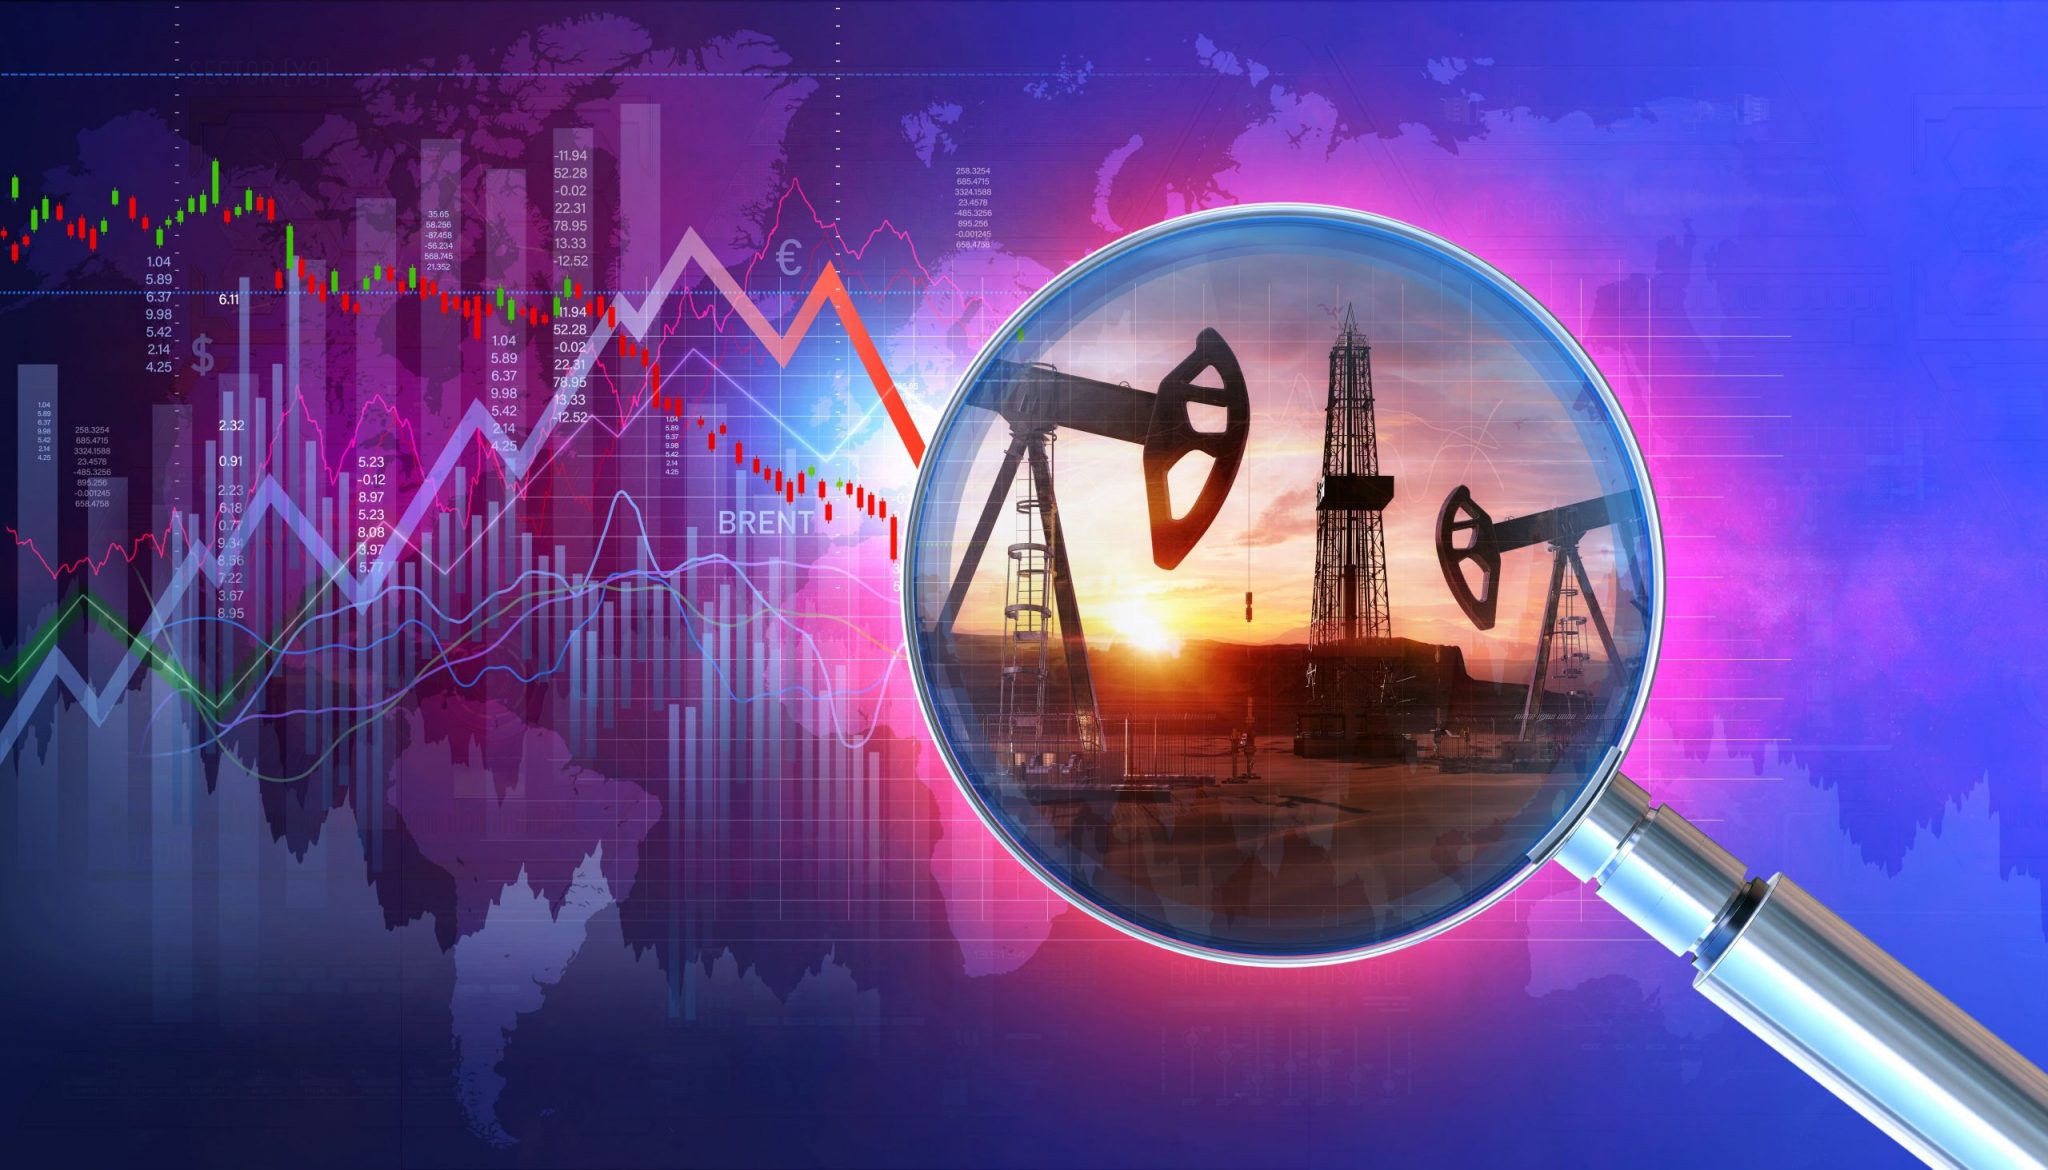 Oil Prices Dip On China Demand Worries